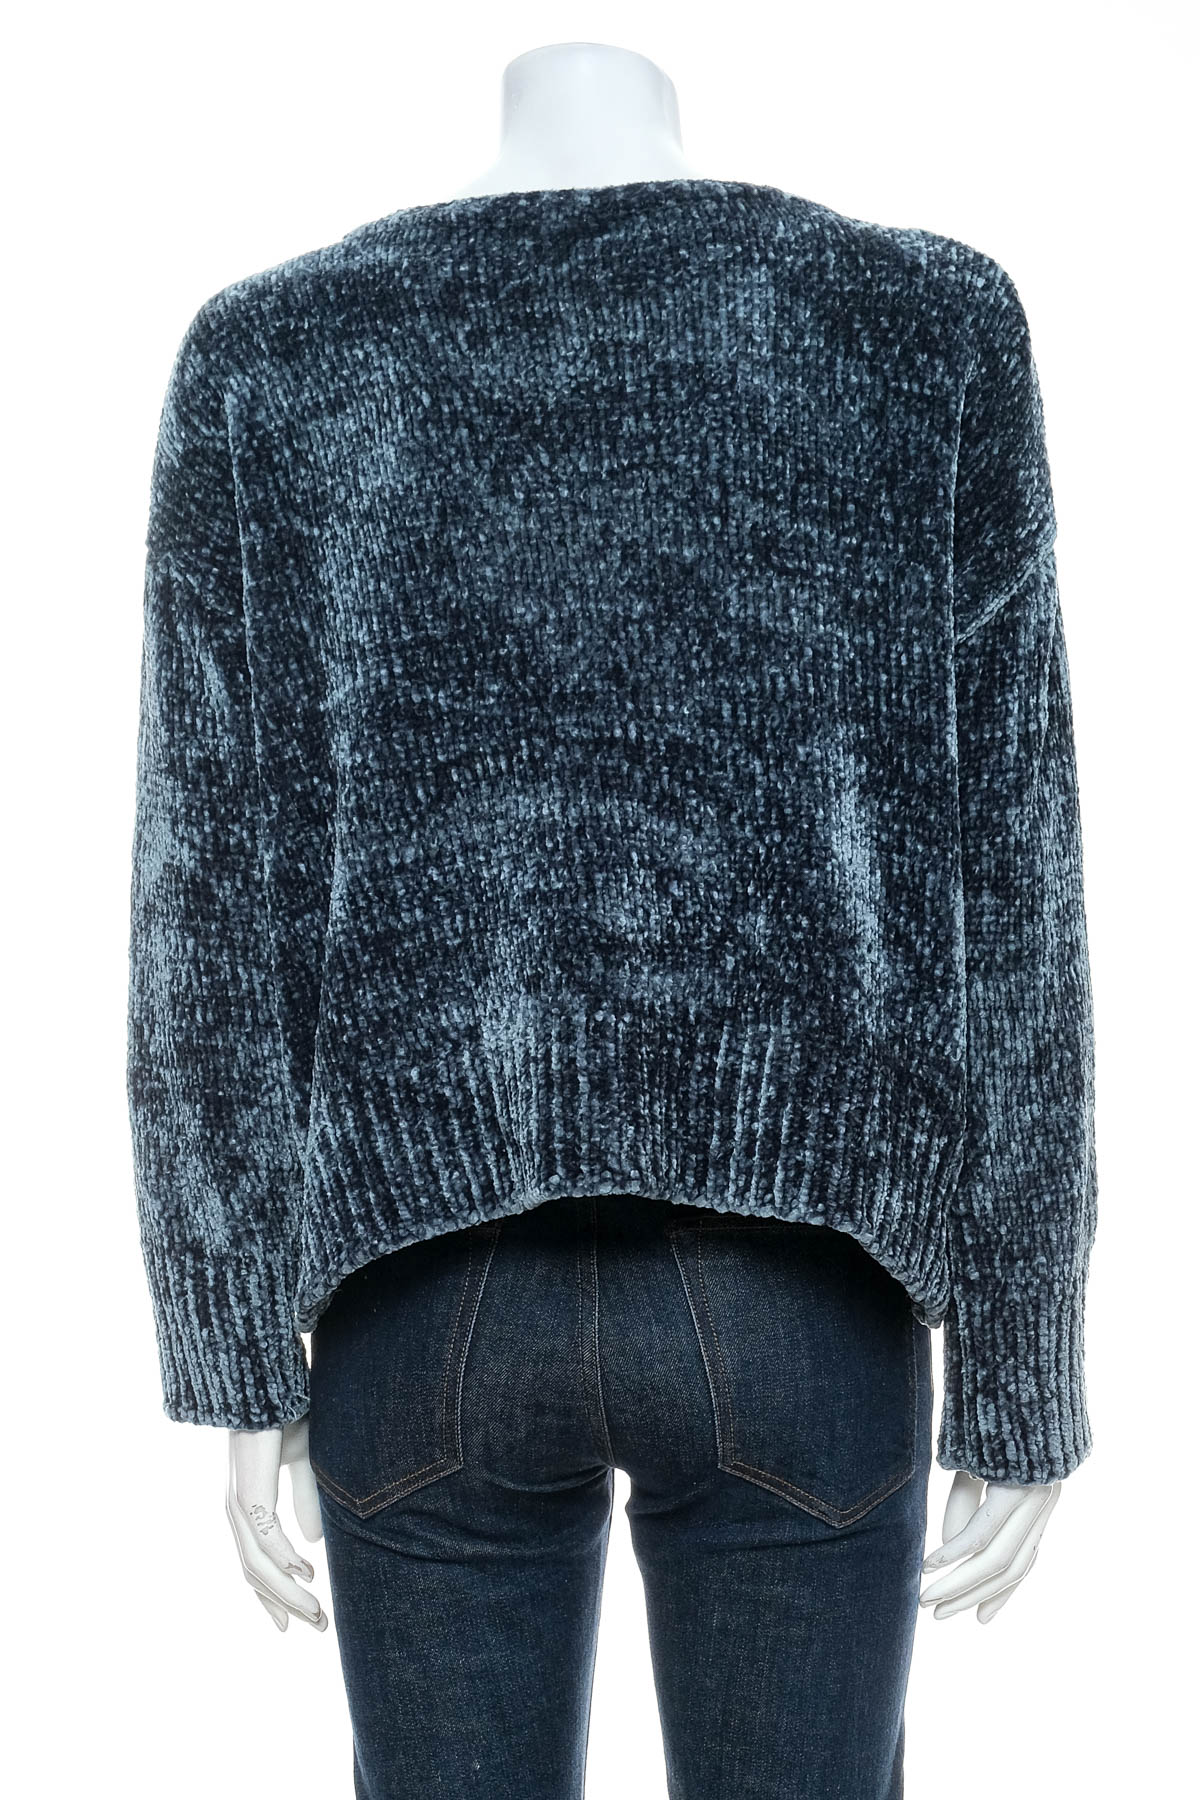 Women's sweater - Clothing & CO - 1